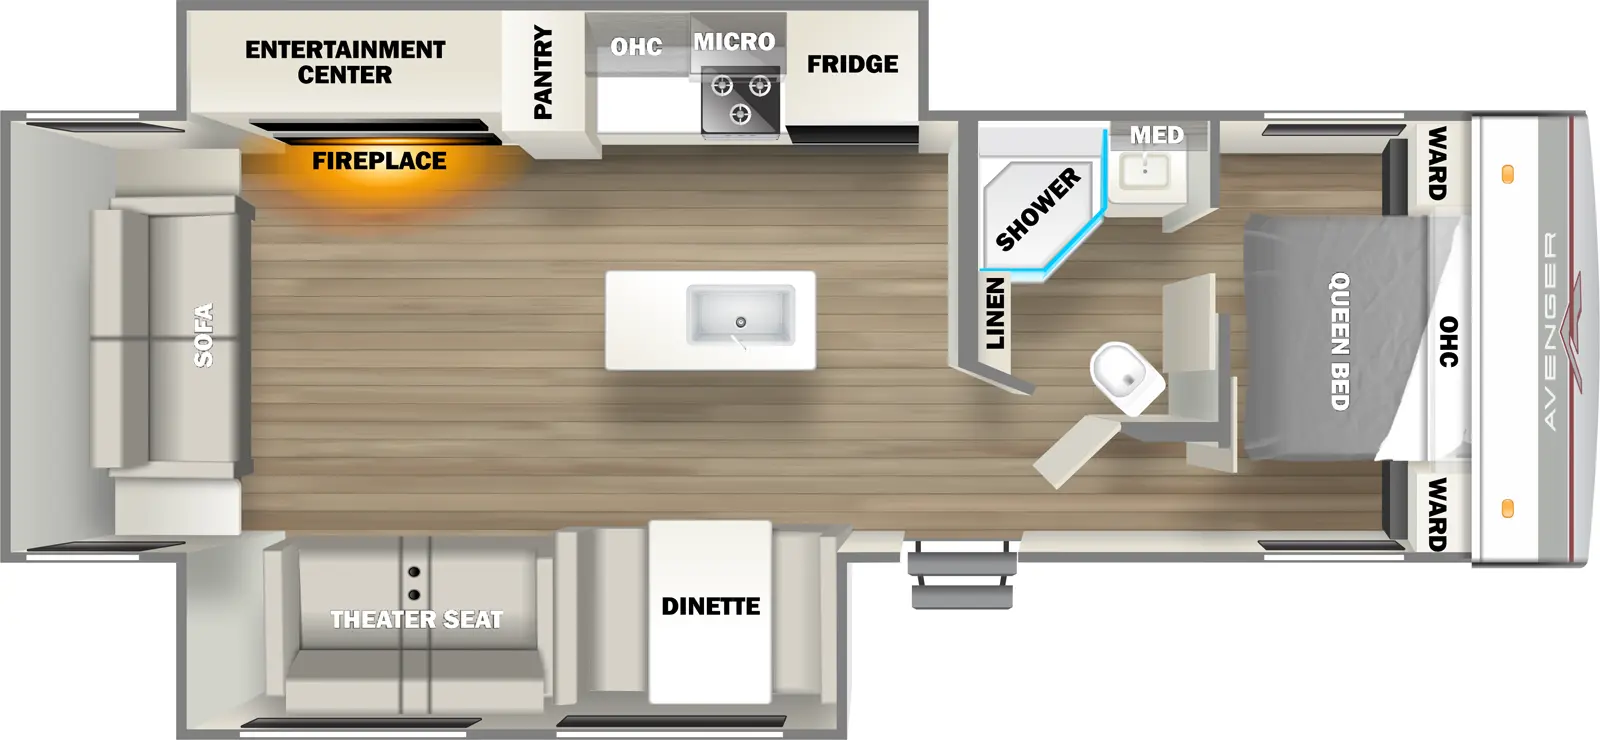 The 28REI has one entry door and two slideouts. Interior layout front to back: foot facing queen bed with overhead cabinet and wardrobes on each side; off-door side full pass through bathroom with linen closet and medicine cabinet; door side entry, and slideout with dinette and theater seat; kitchen island with sink; off-door side slideout with refrigerator, microwave, cooktop, overhead cabinet, pantry, and entertainment center with fireplace below; rear sofa.